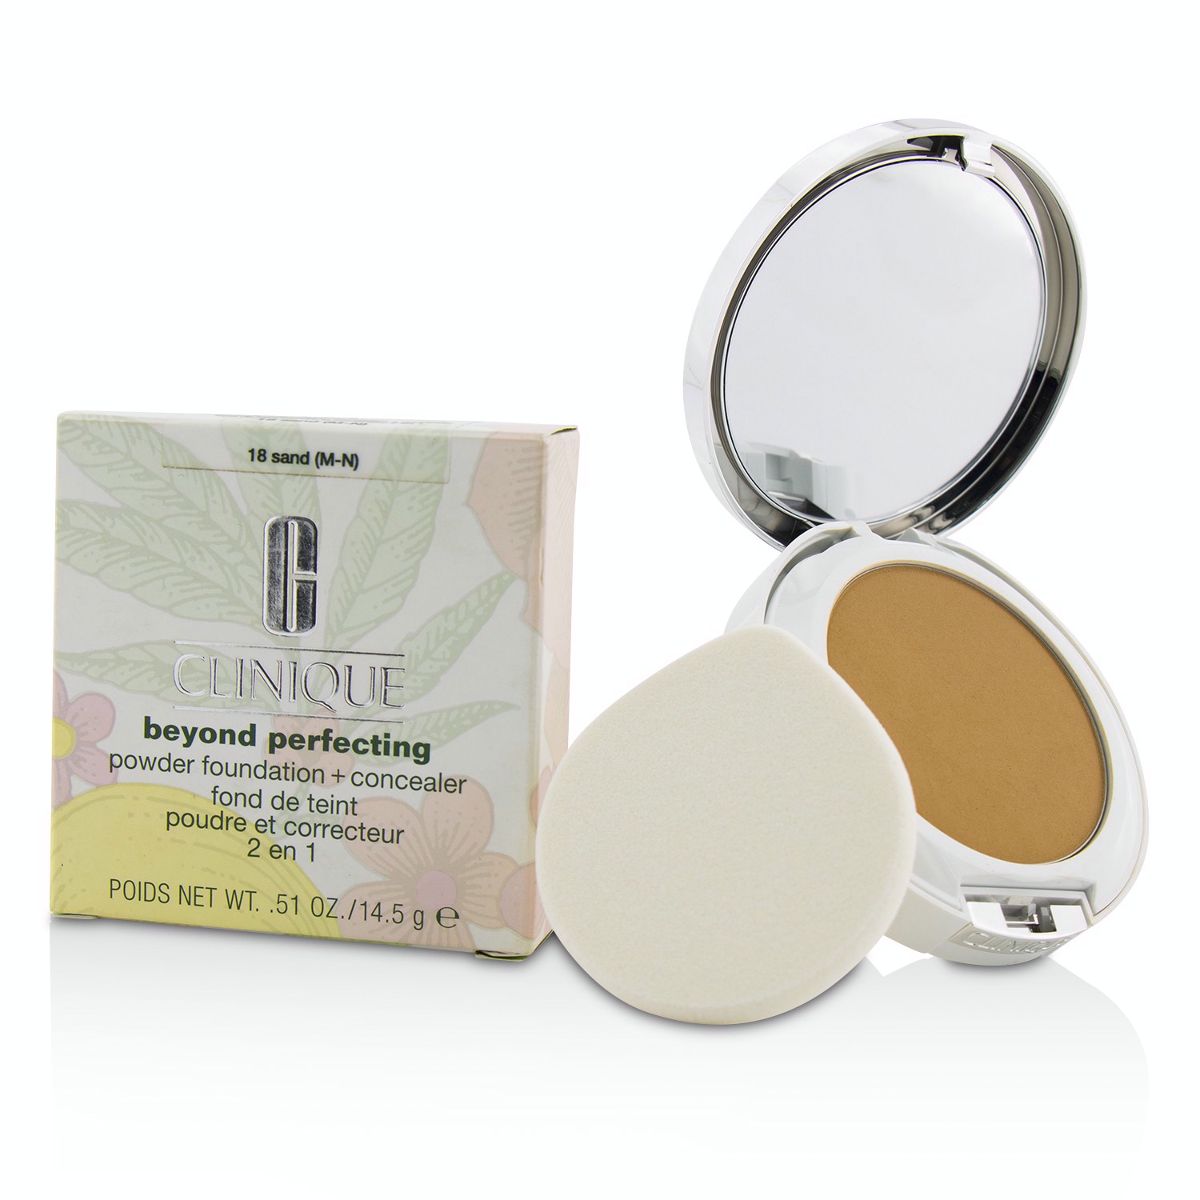 Beyond Perfecting Powder Foundation + Corrector - # 18 Sand (M-N) Clinique Image